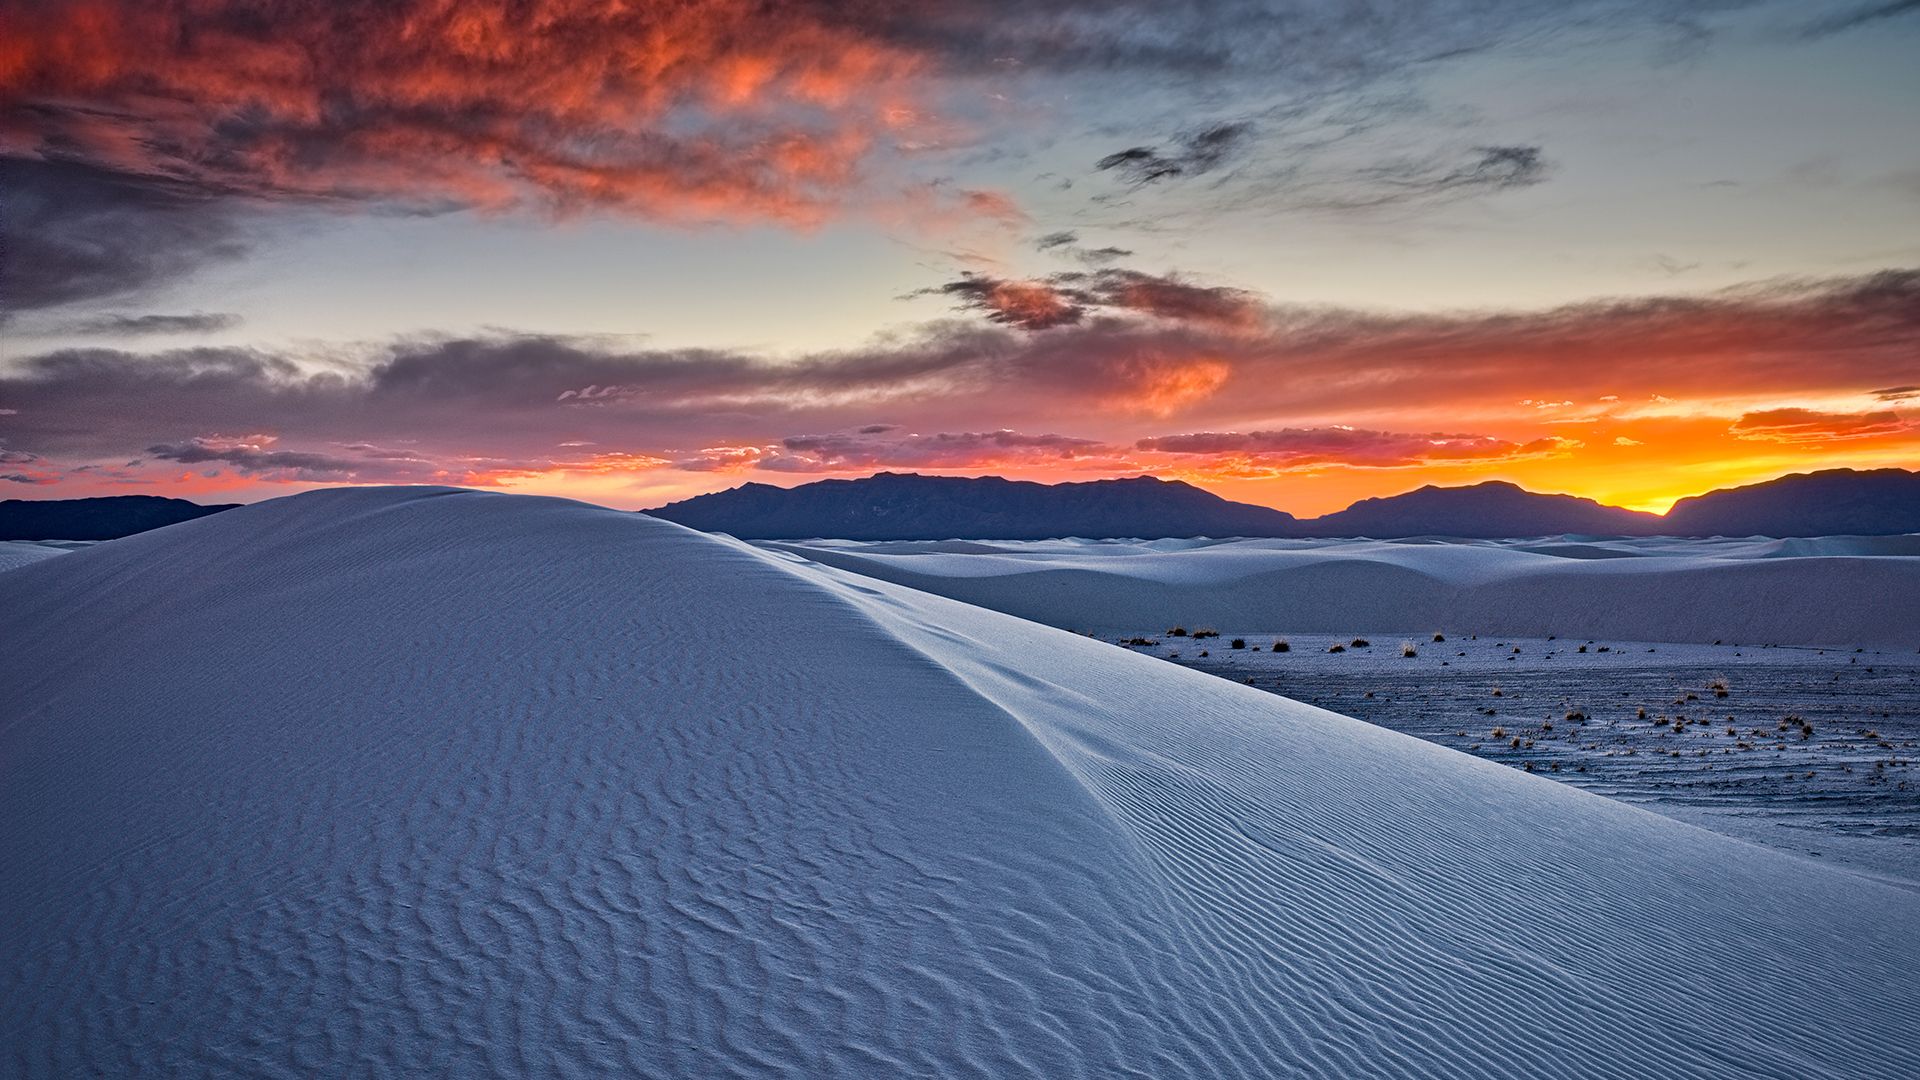 Craig Varjabedian: Photographing White Sands. New Mexico In Focus